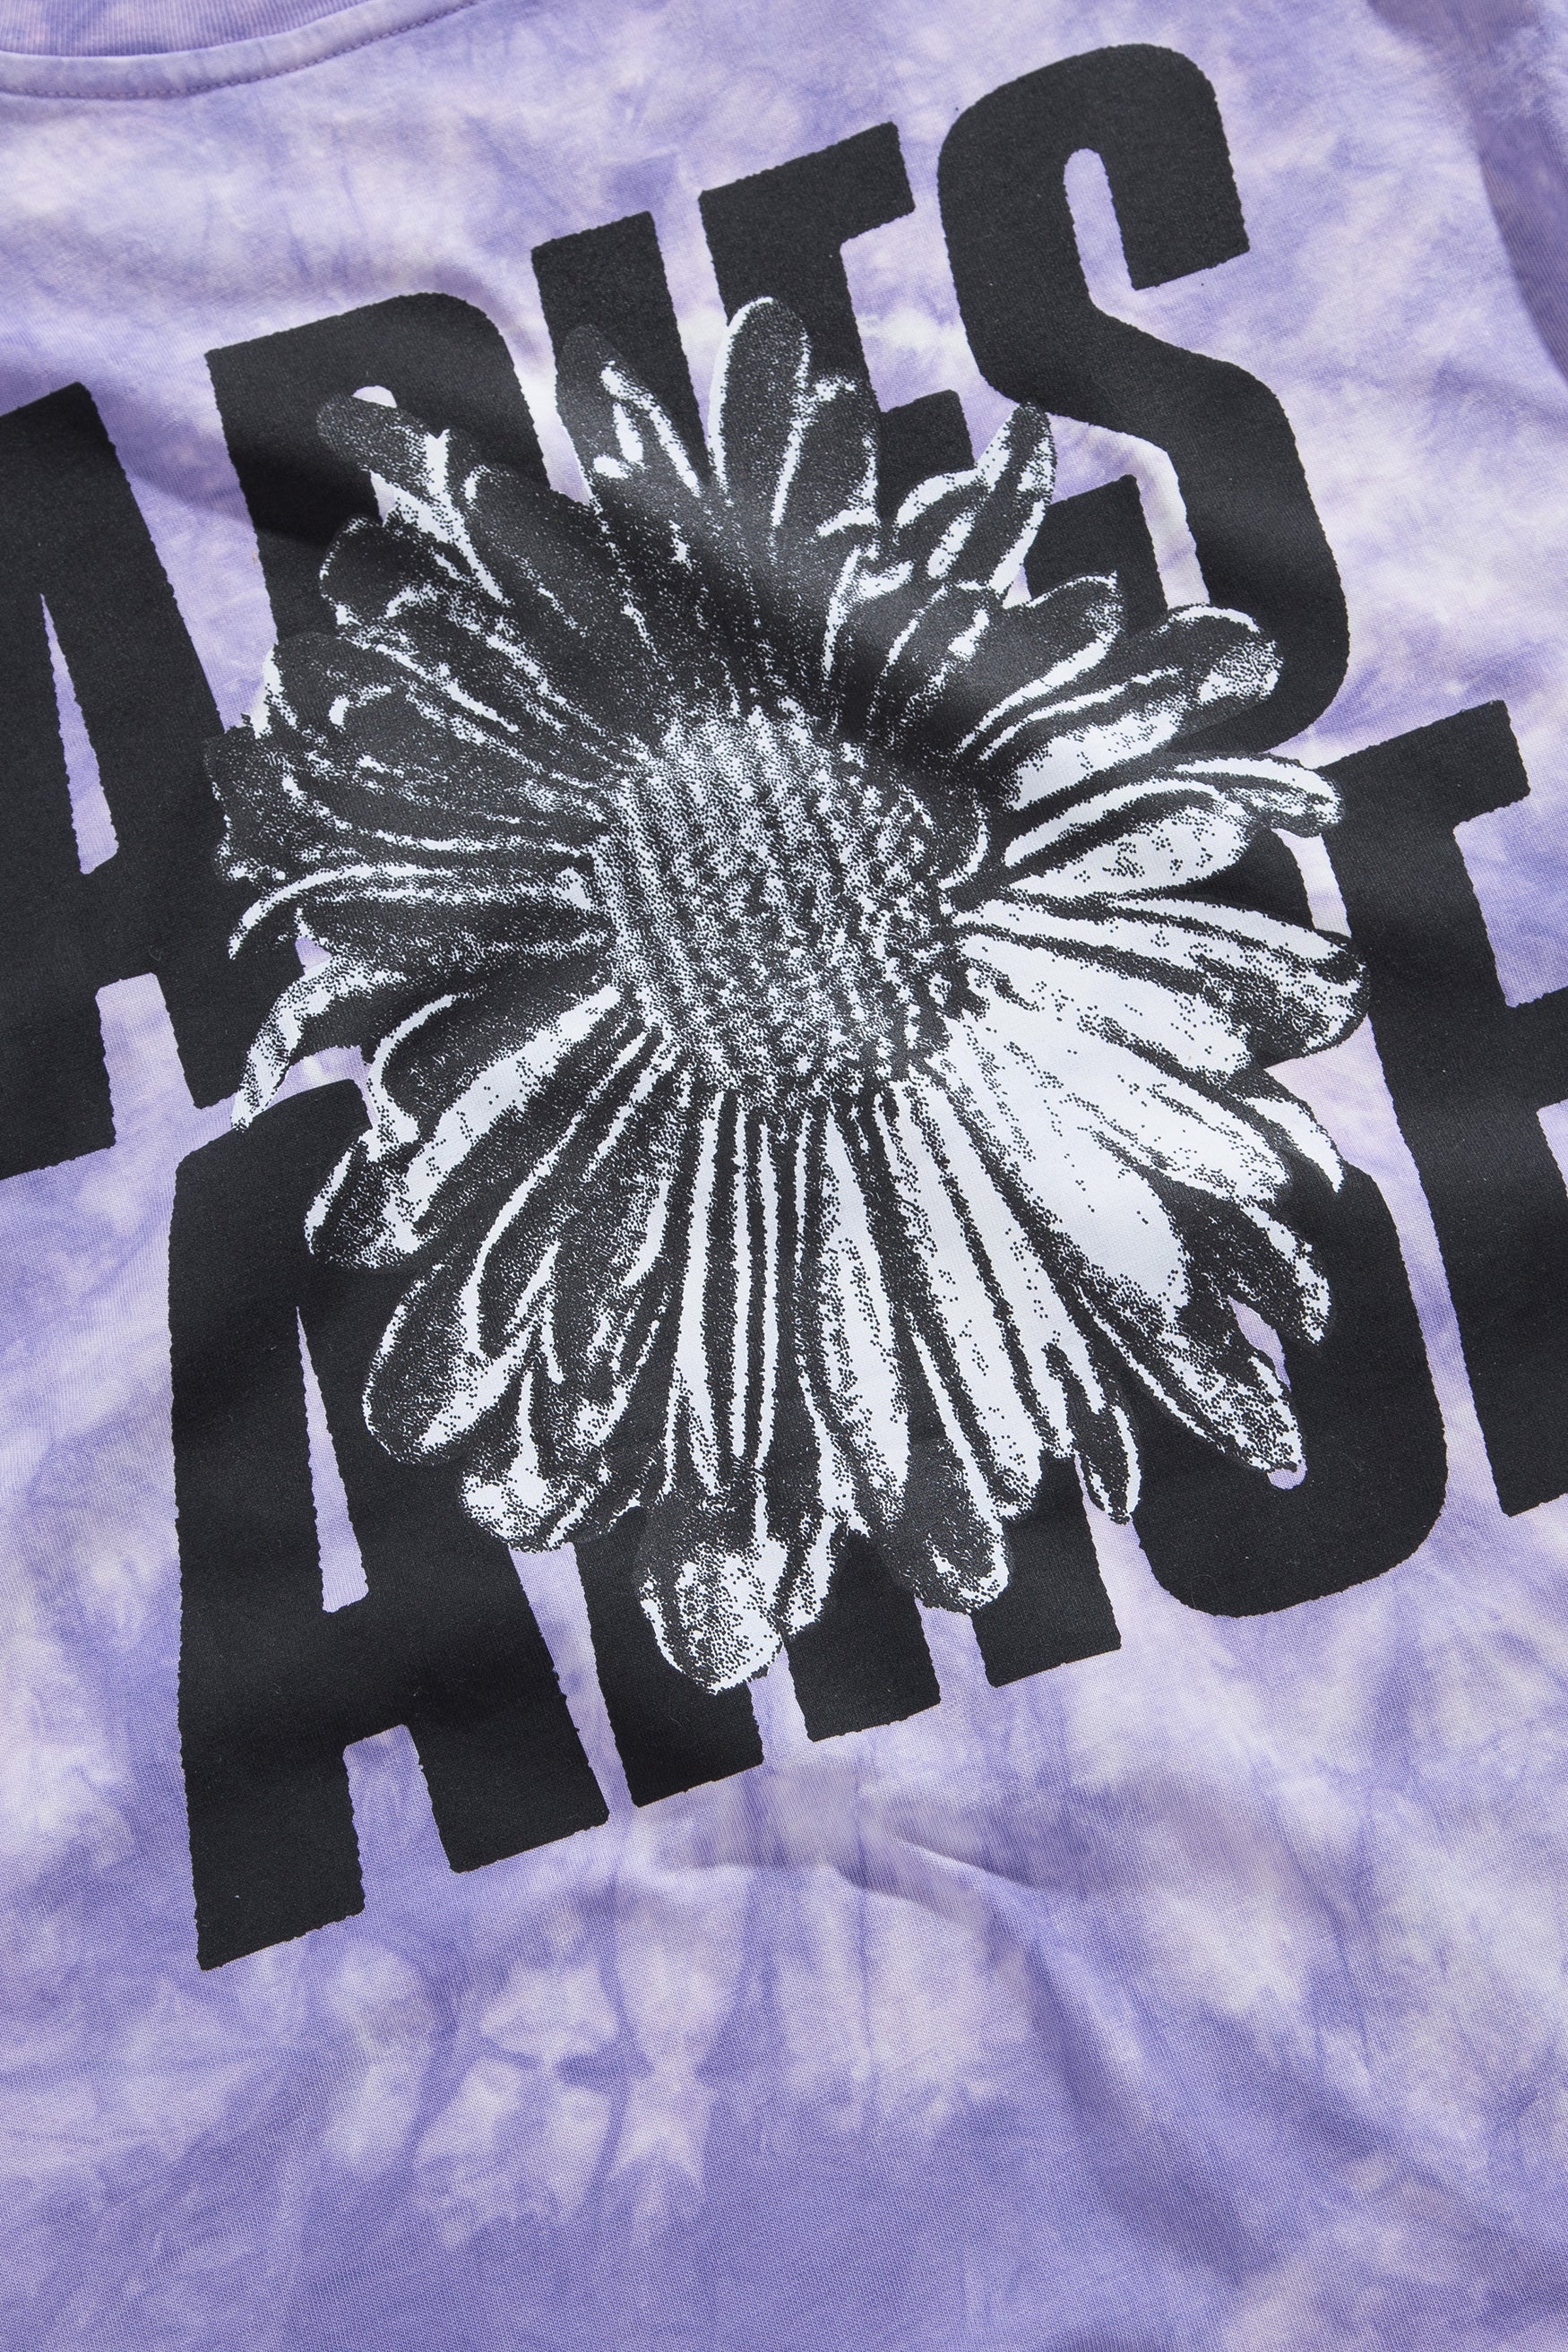 Load image into Gallery viewer, i-D Flower Tie Dye T